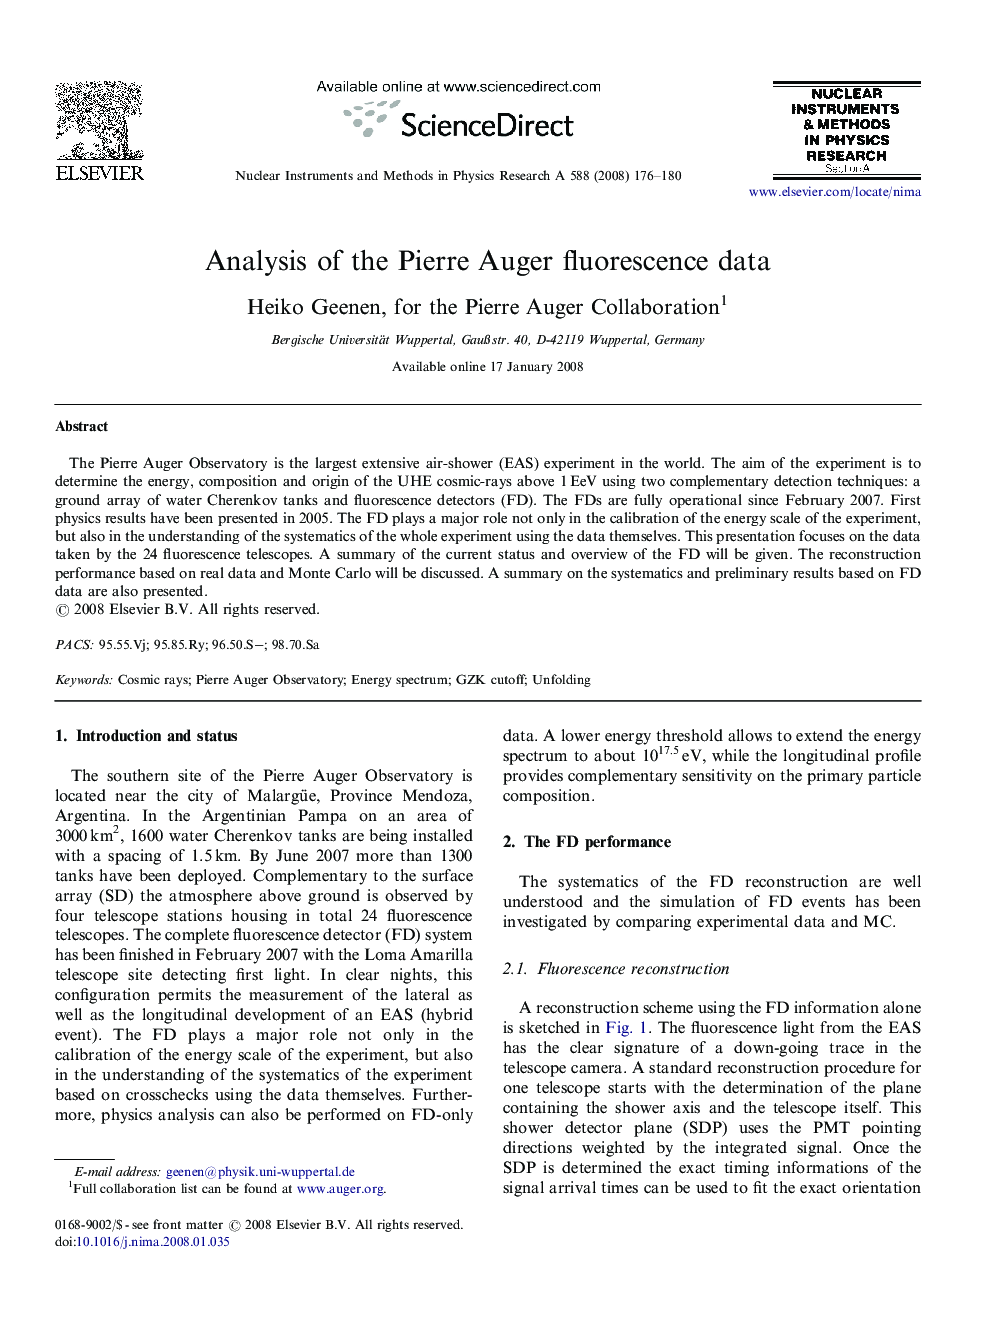 Analysis of the Pierre Auger fluorescence data